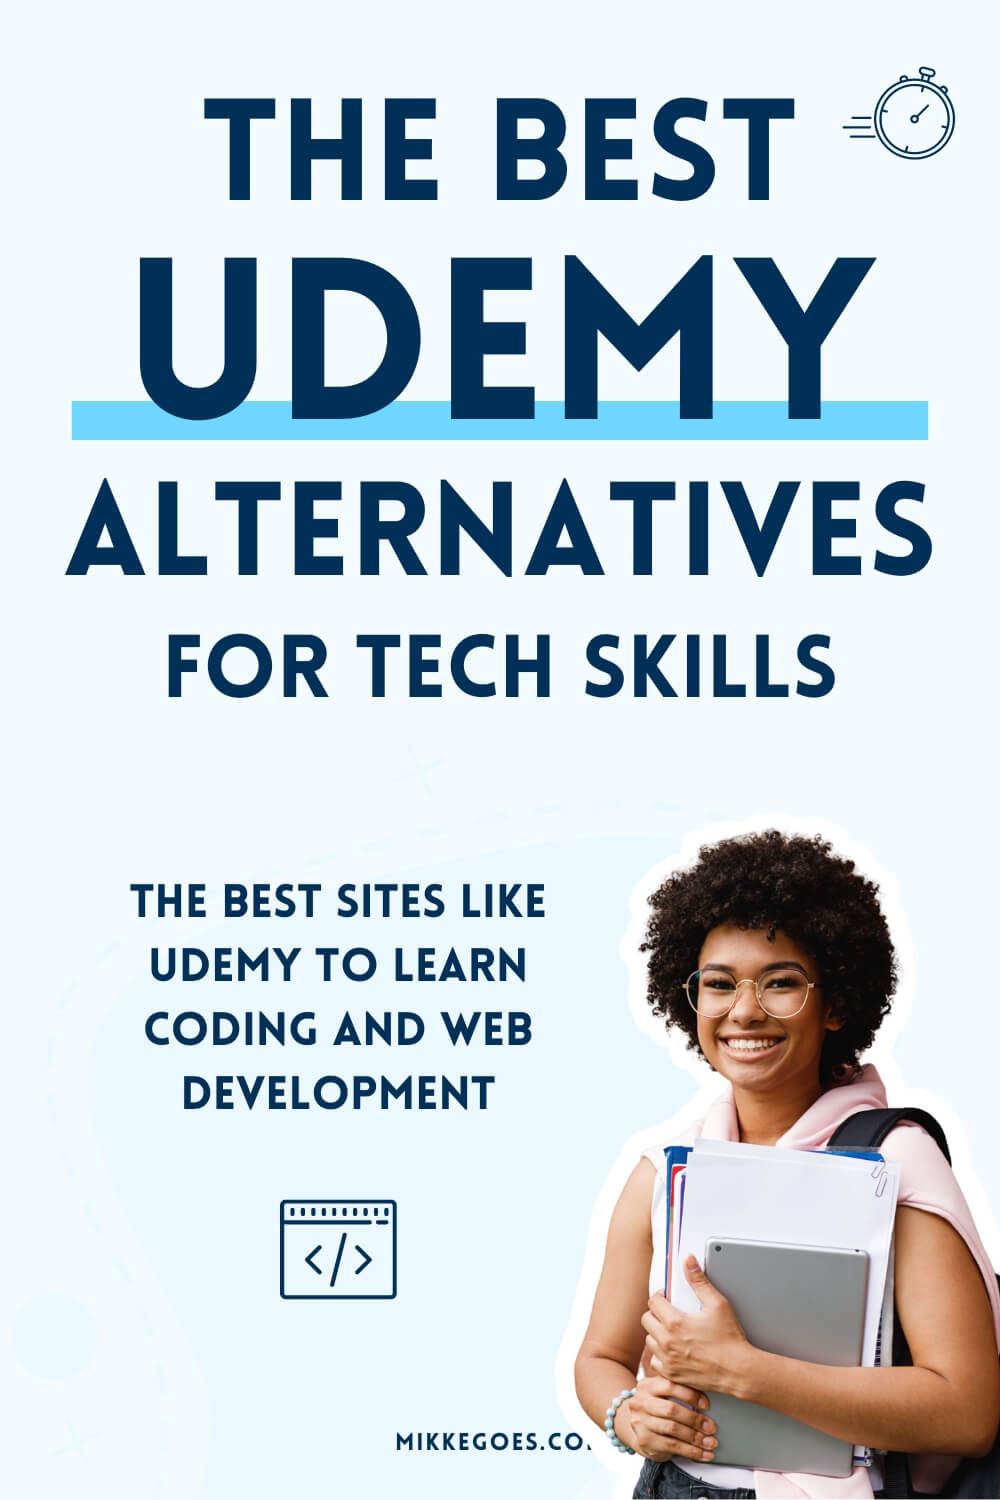 The best Udemy alternatives for learning tech skills